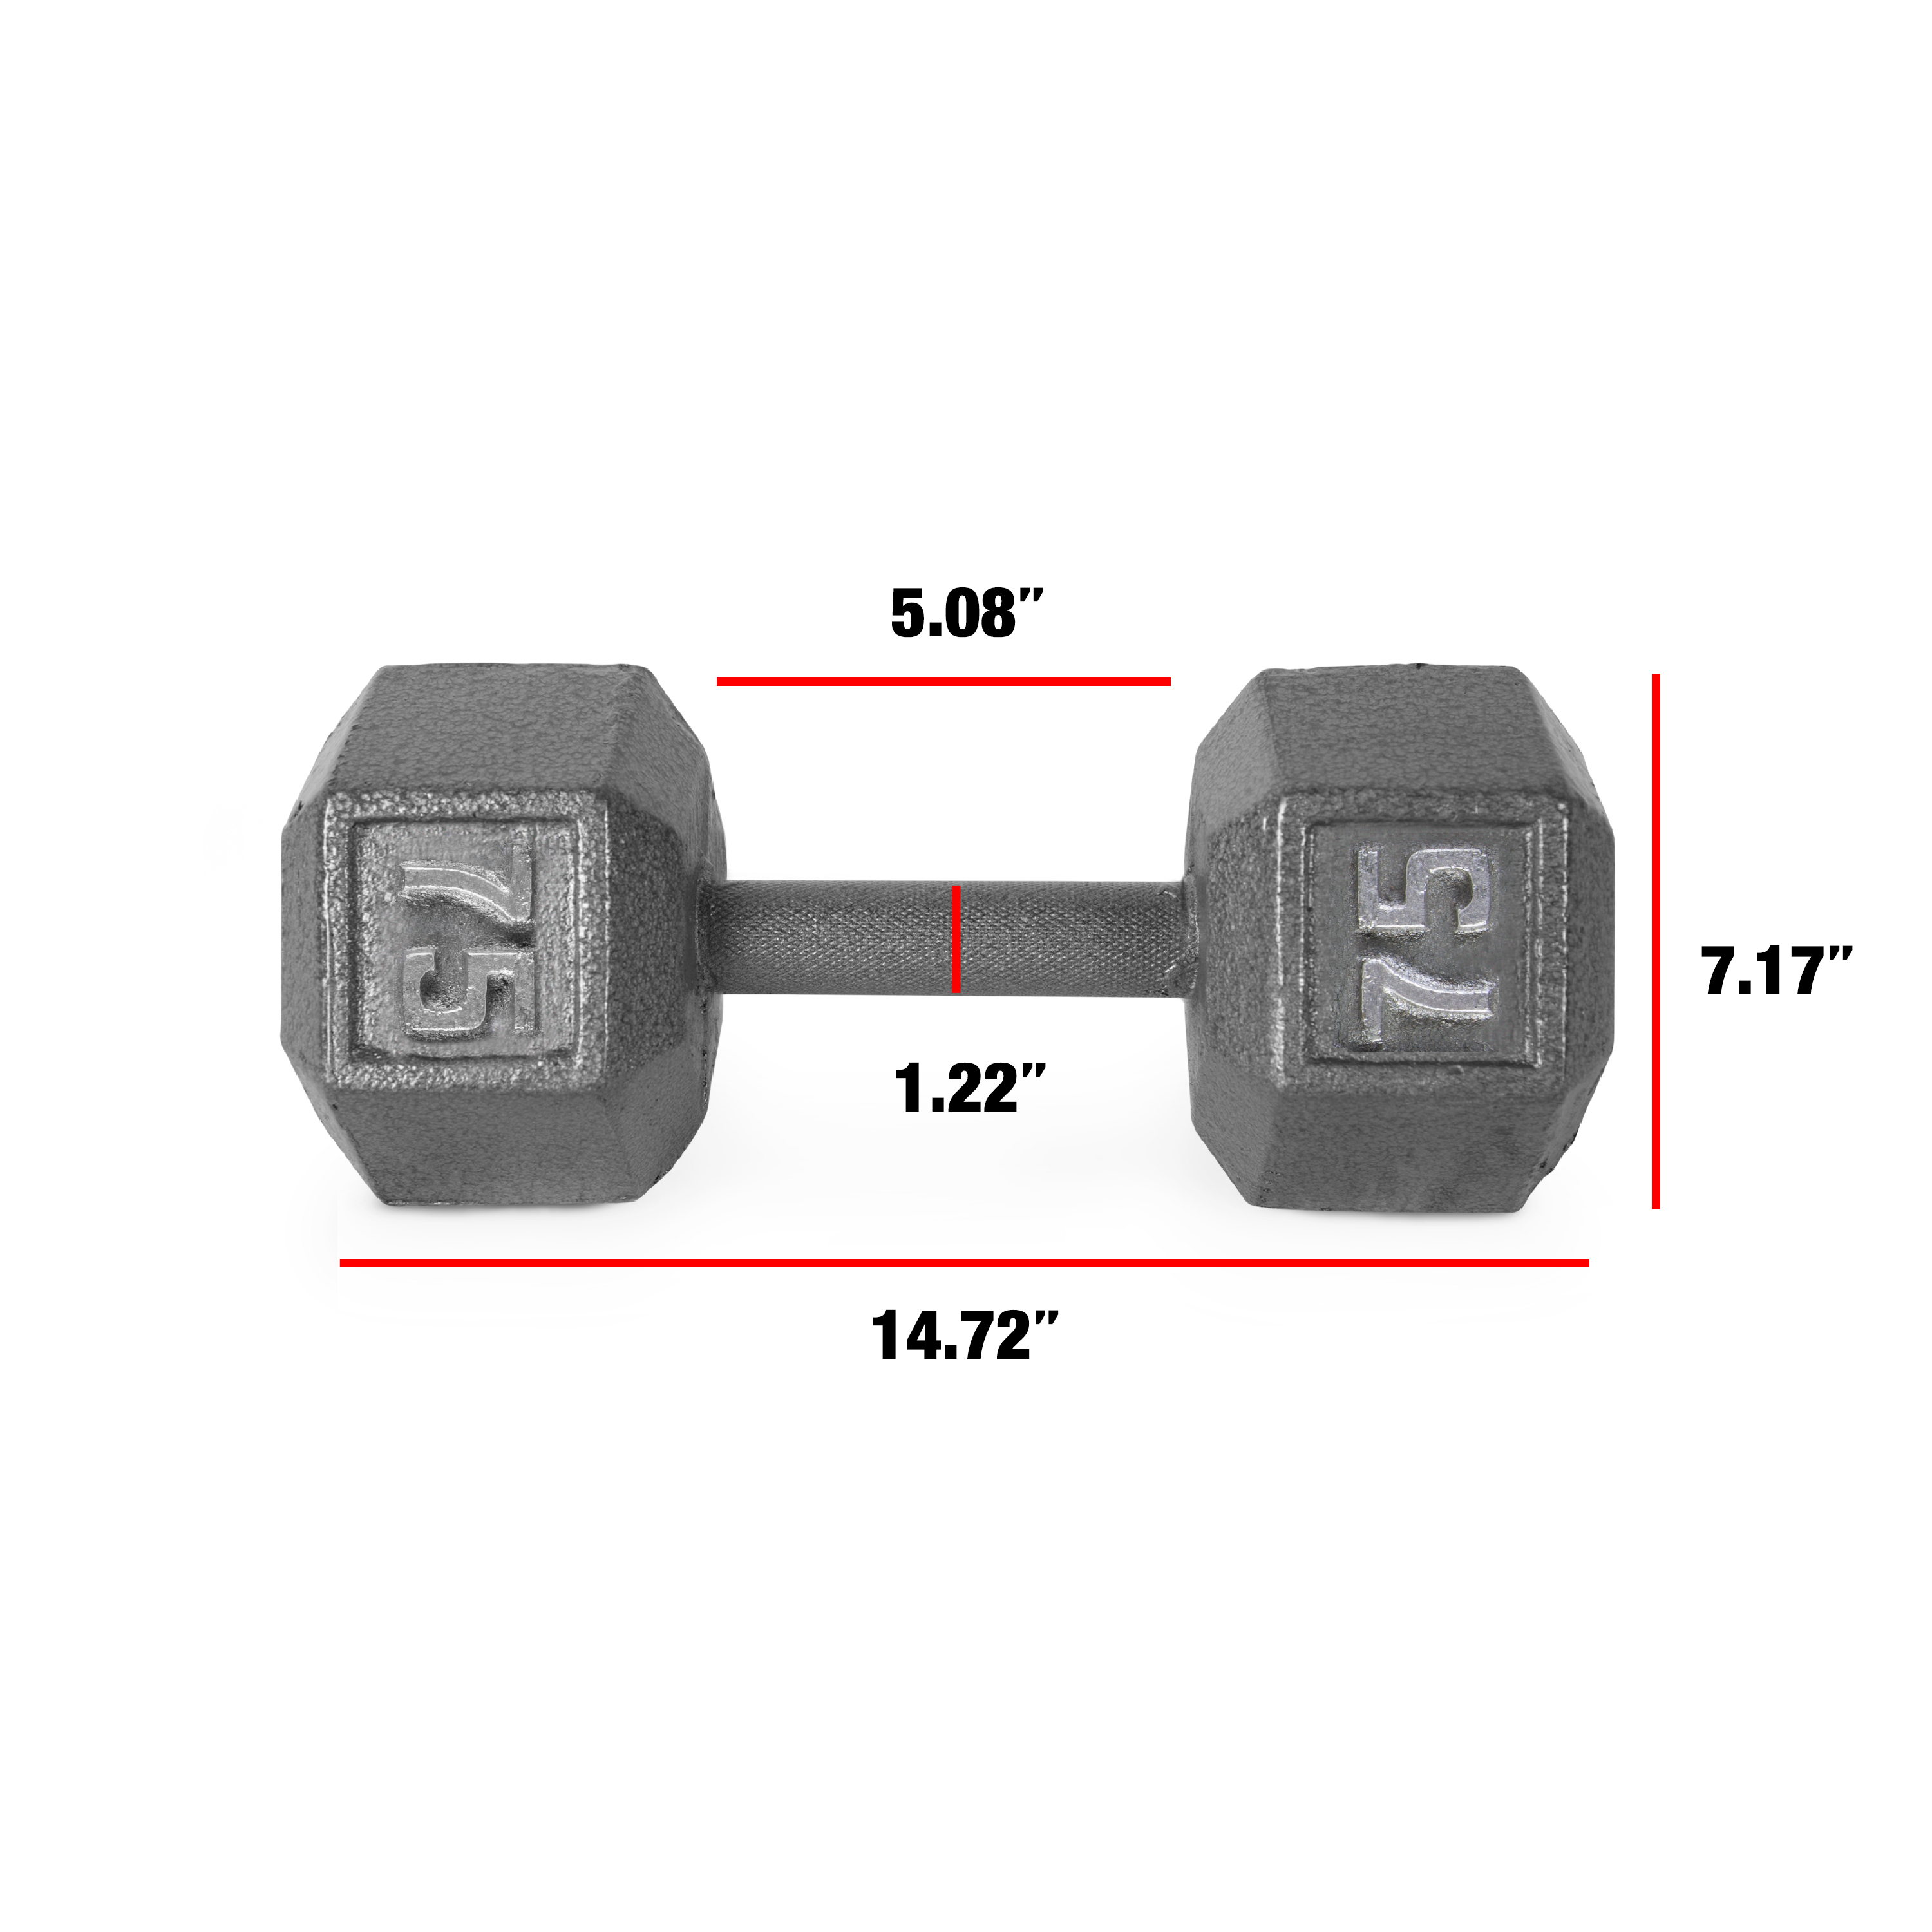 CAP Barbell 75lb Cast Iron Hex Dumbbell, Single - image 3 of 6